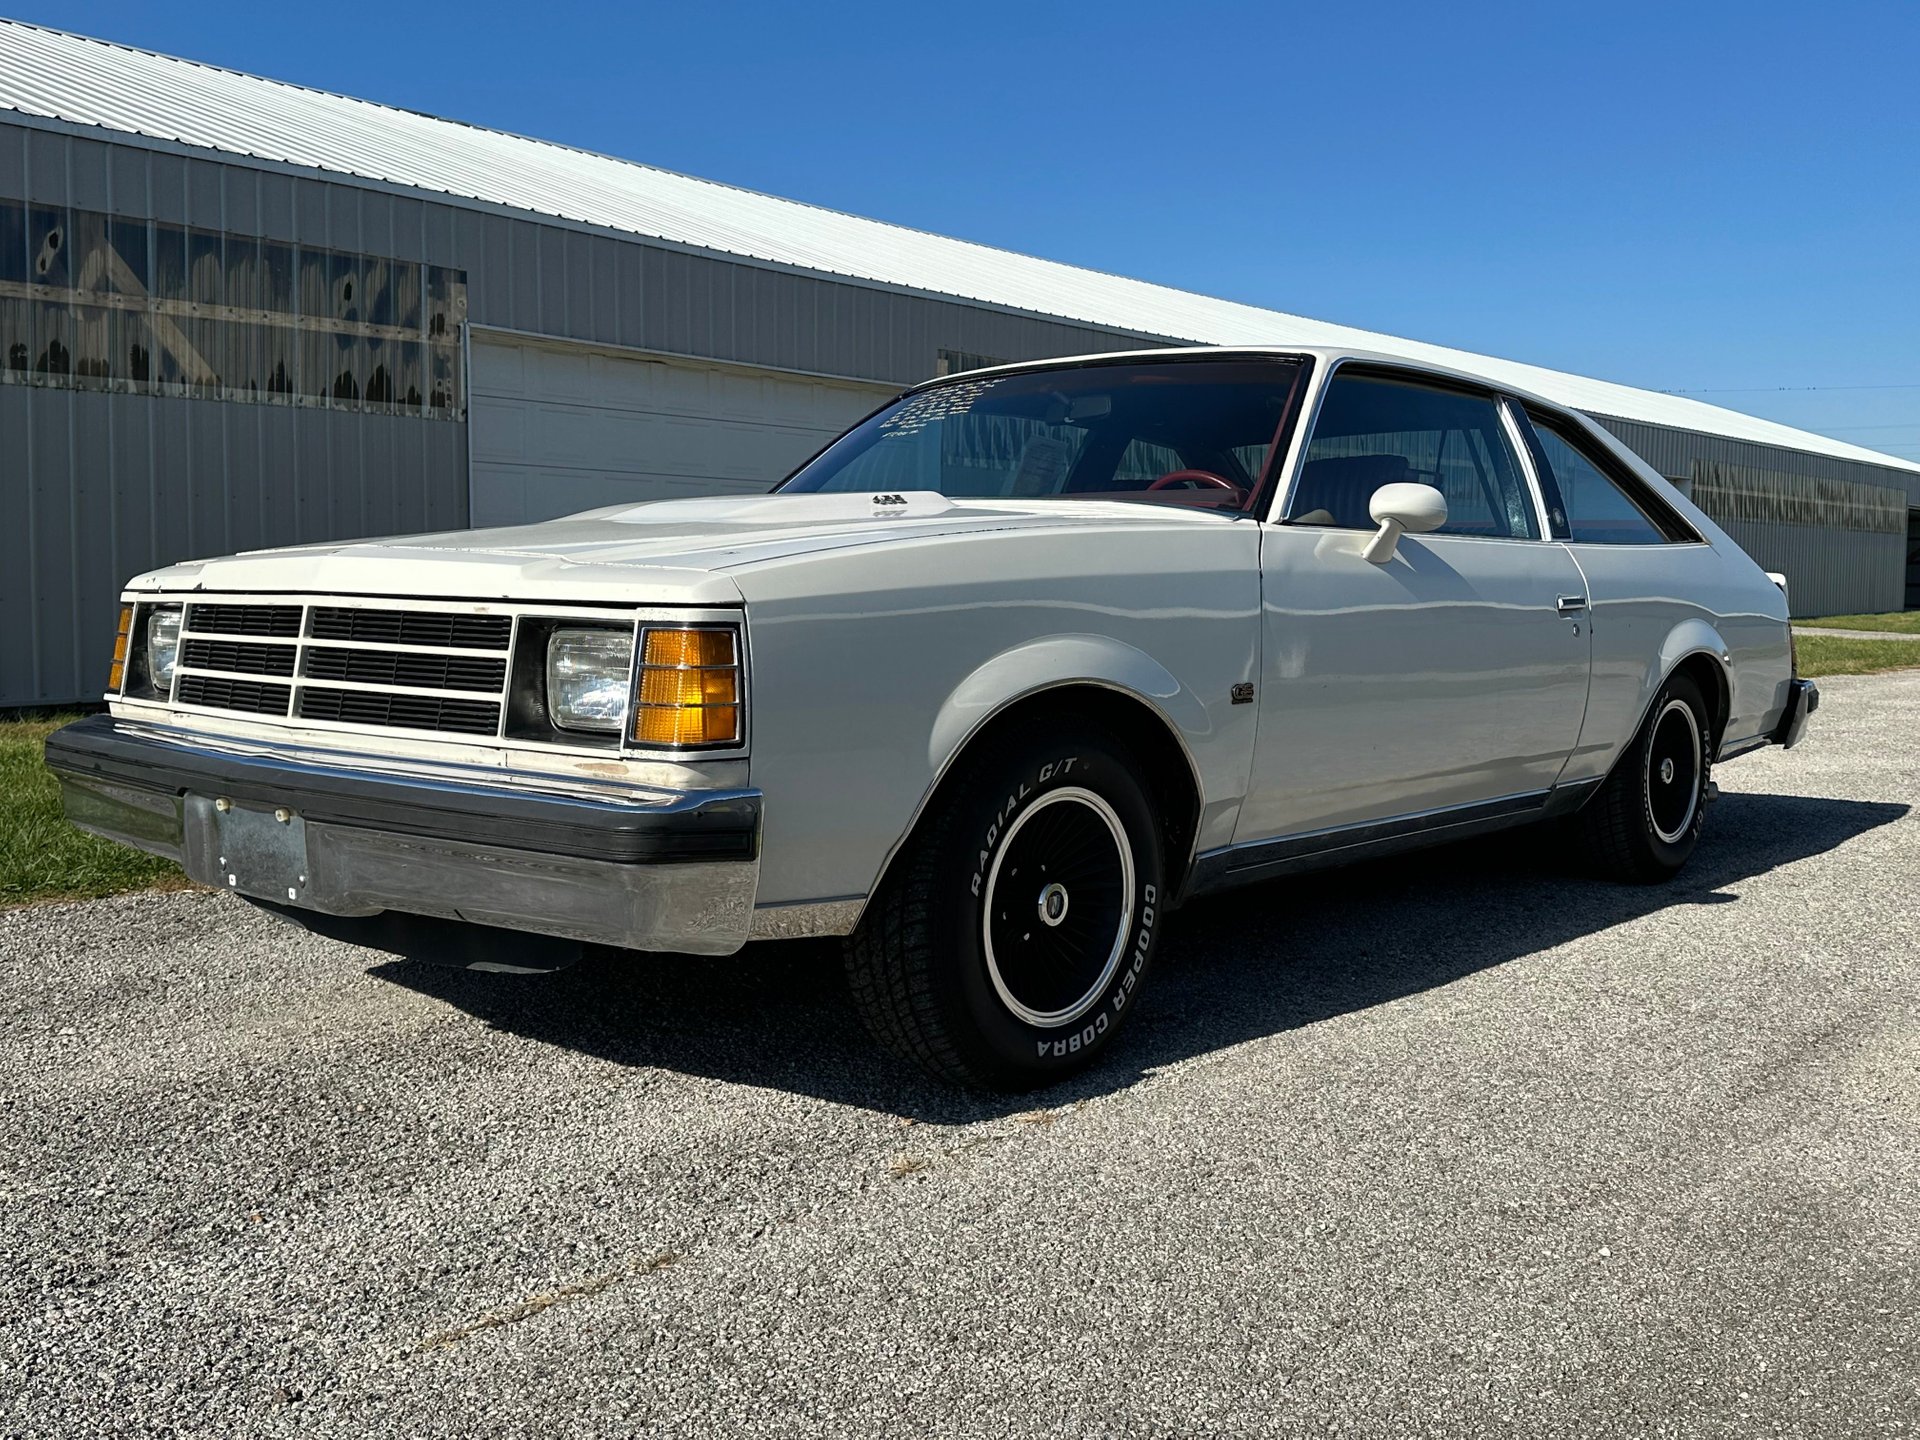 1979 Buick Century | Country Classic Cars